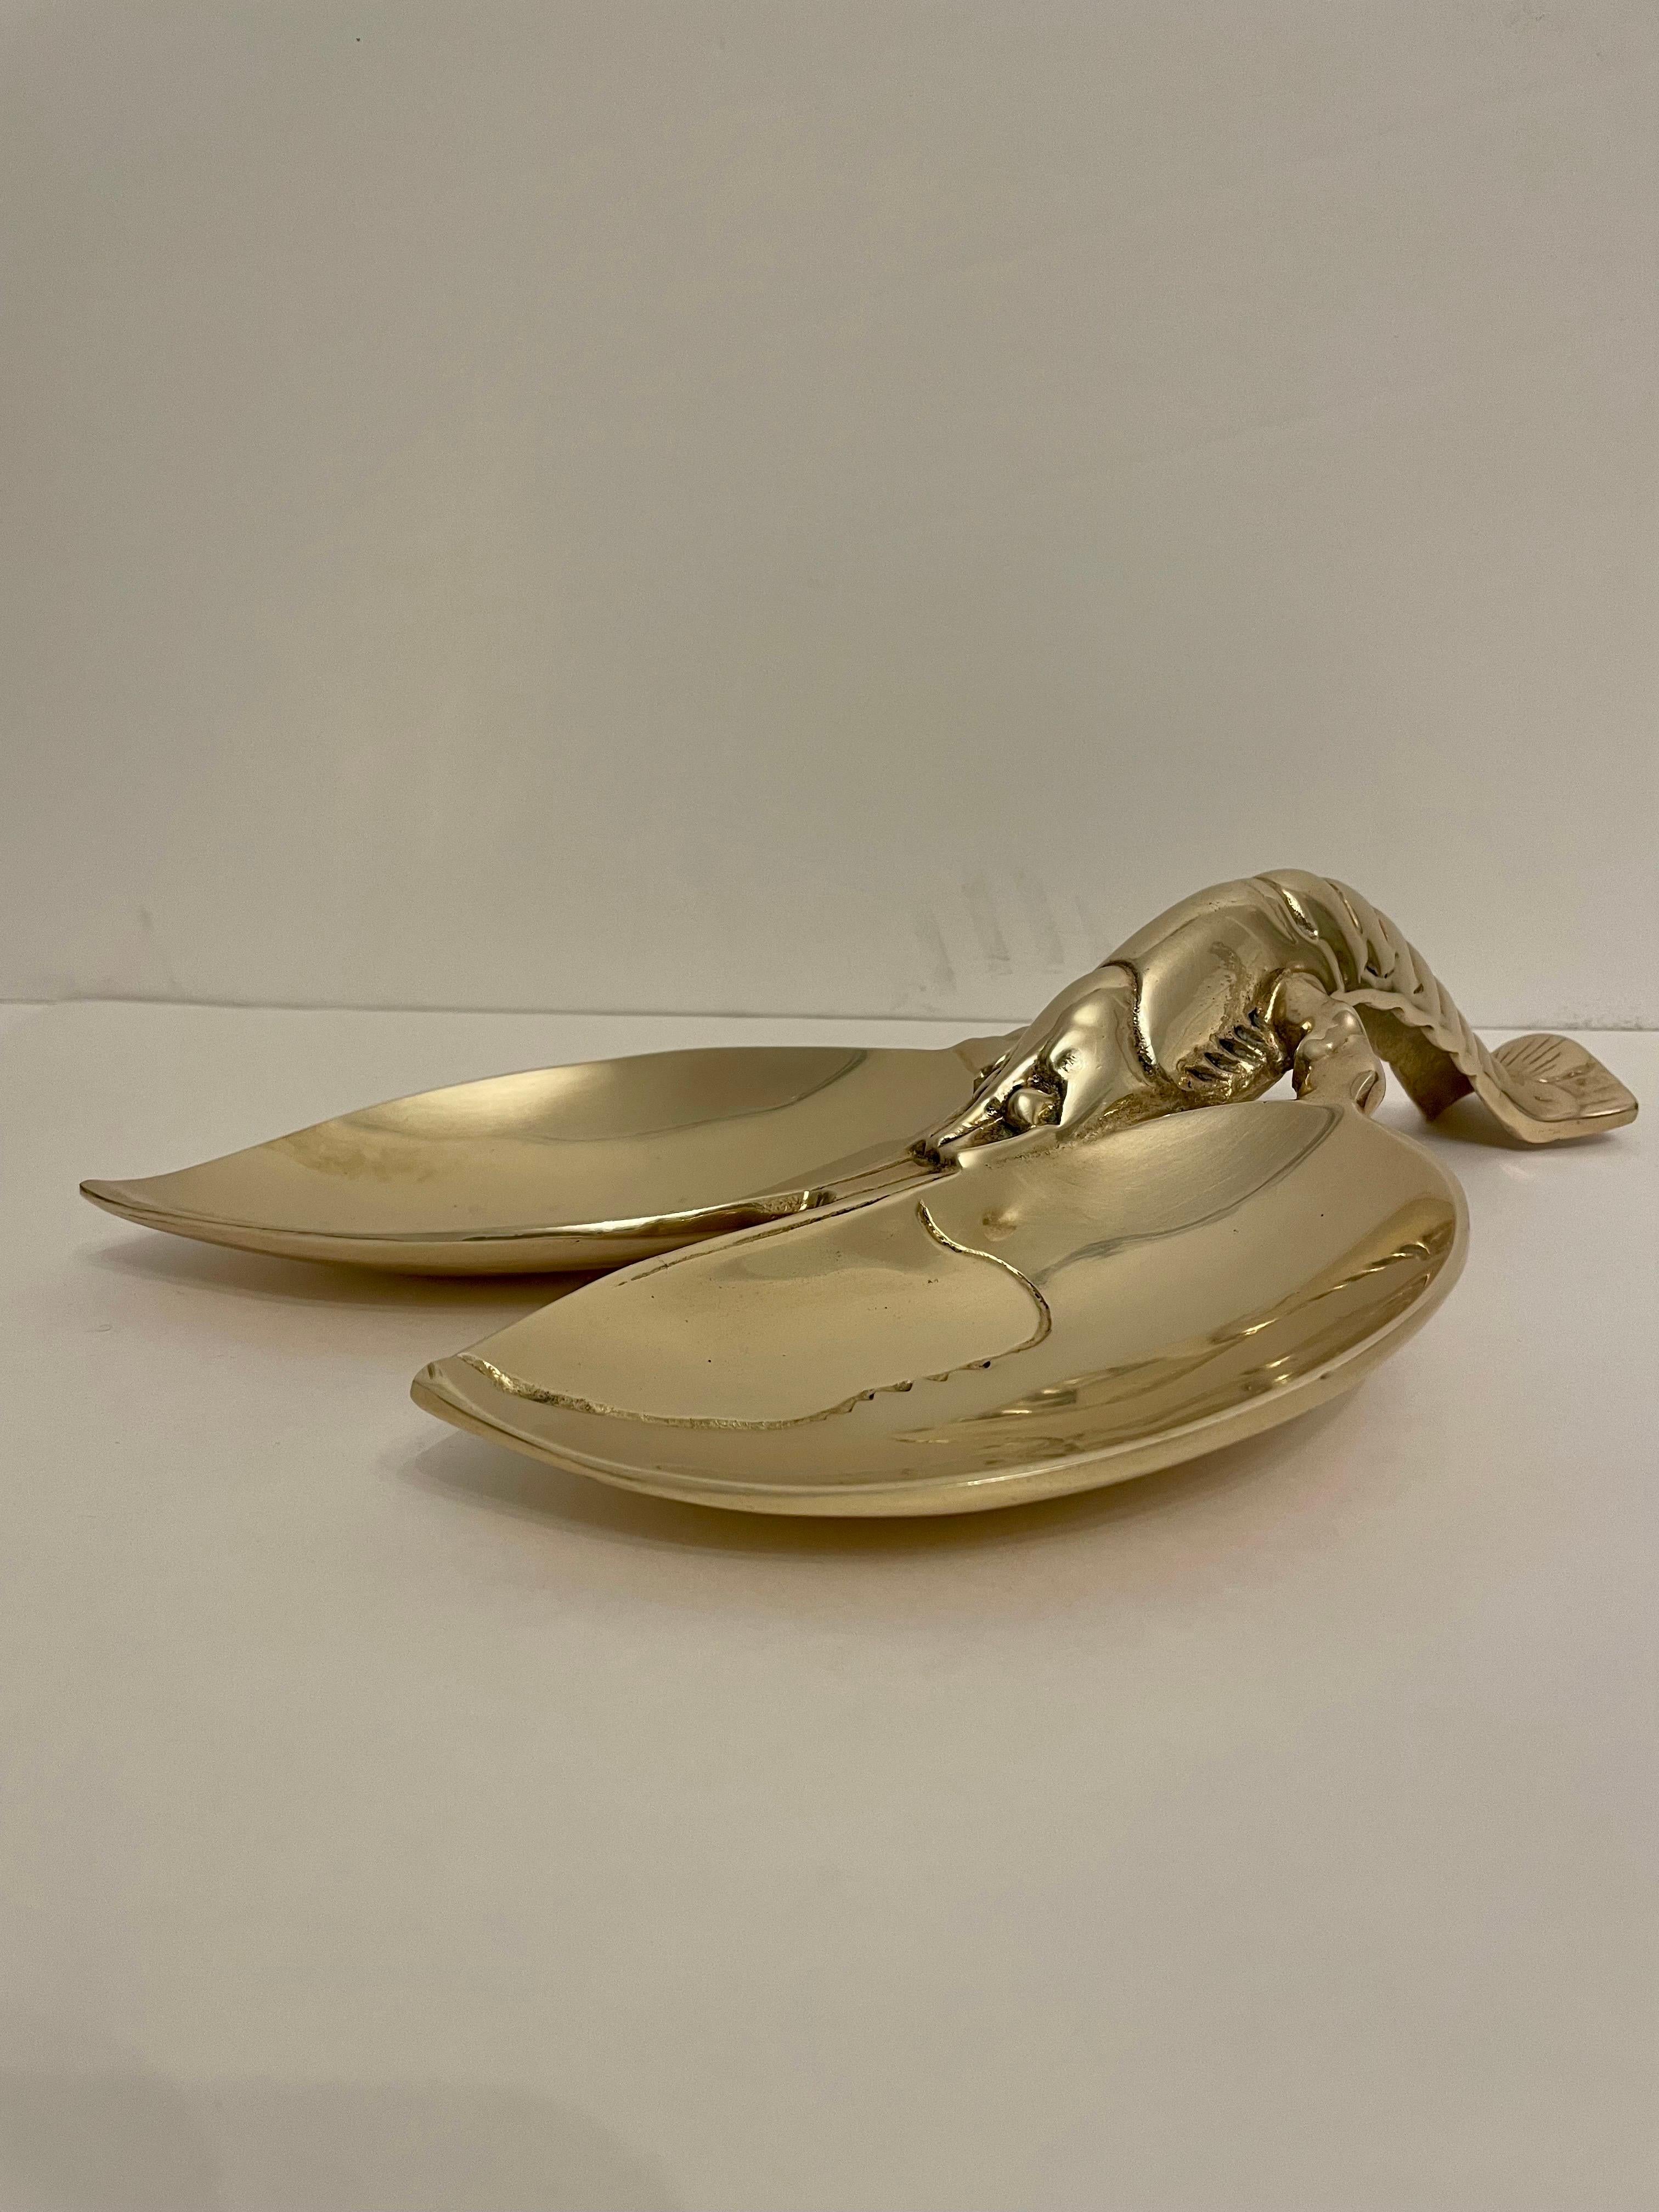 Large Brass Lobster Dish or Spoon Rest Sculpture For Sale 5